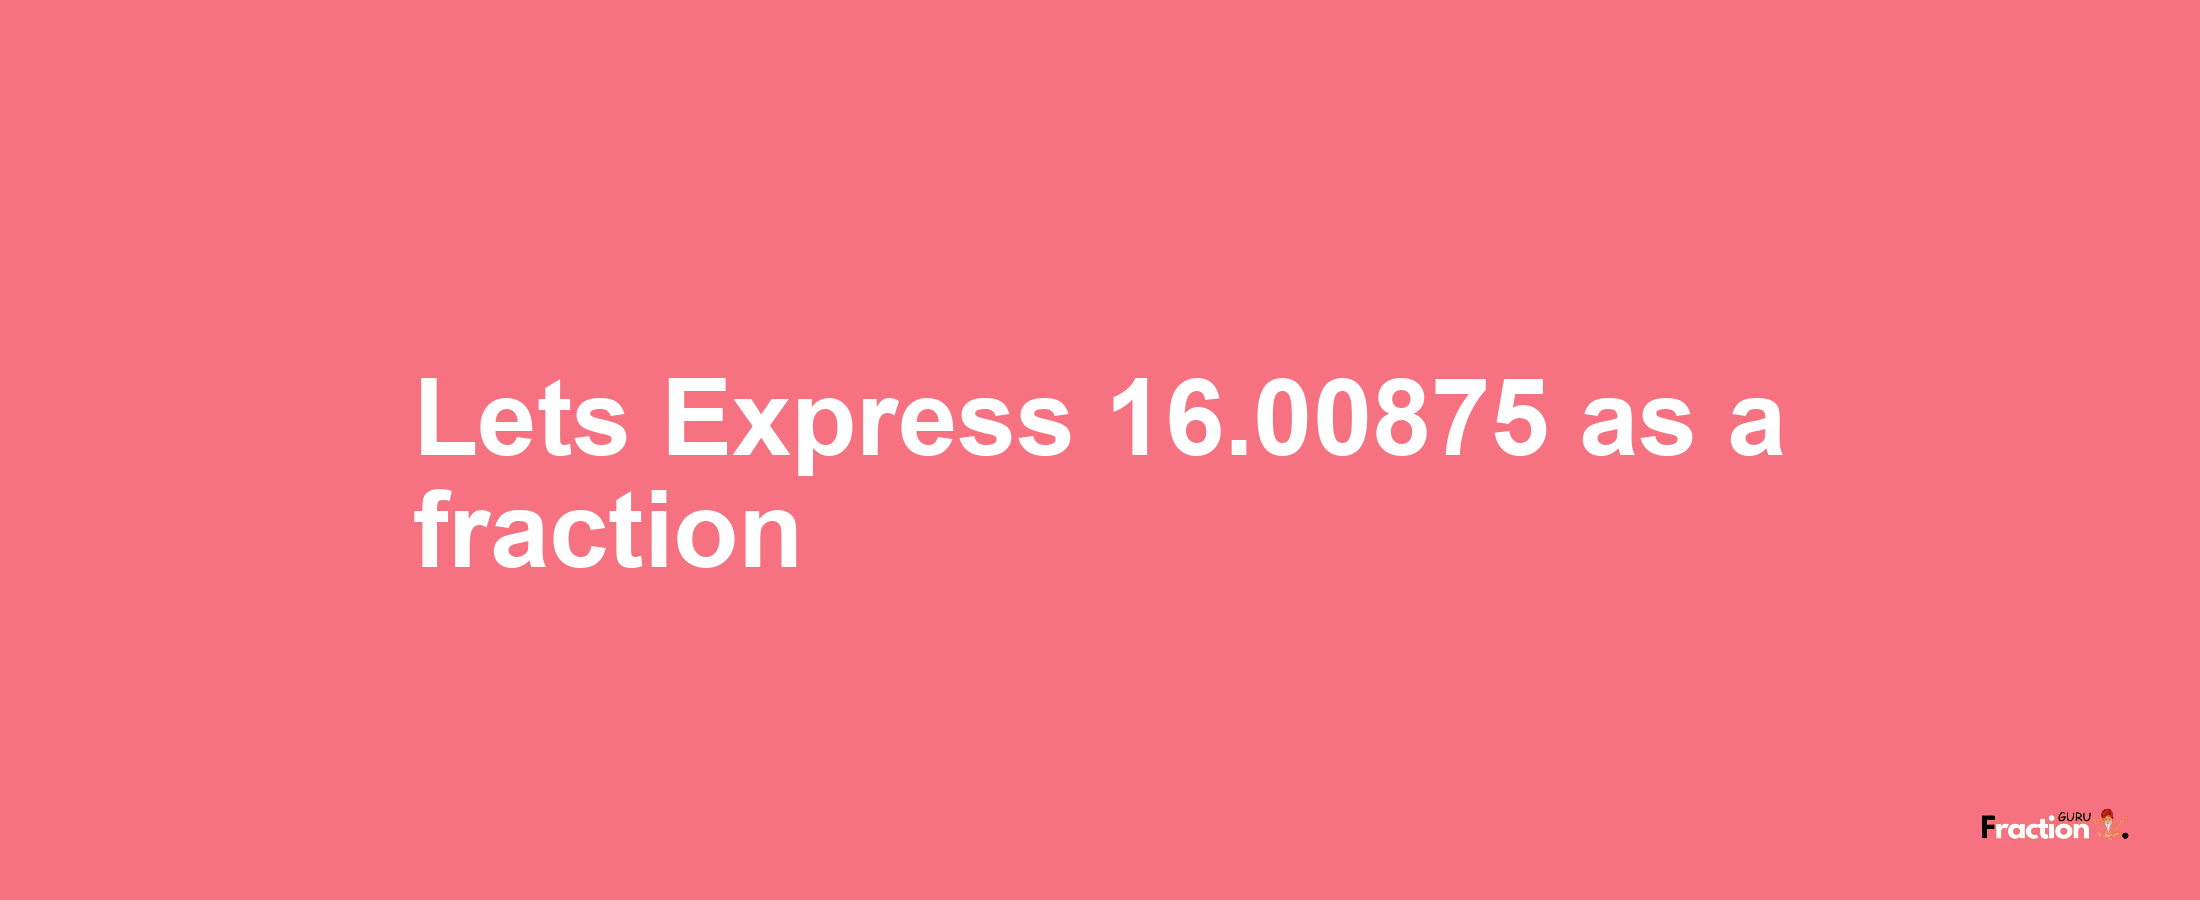 Lets Express 16.00875 as afraction